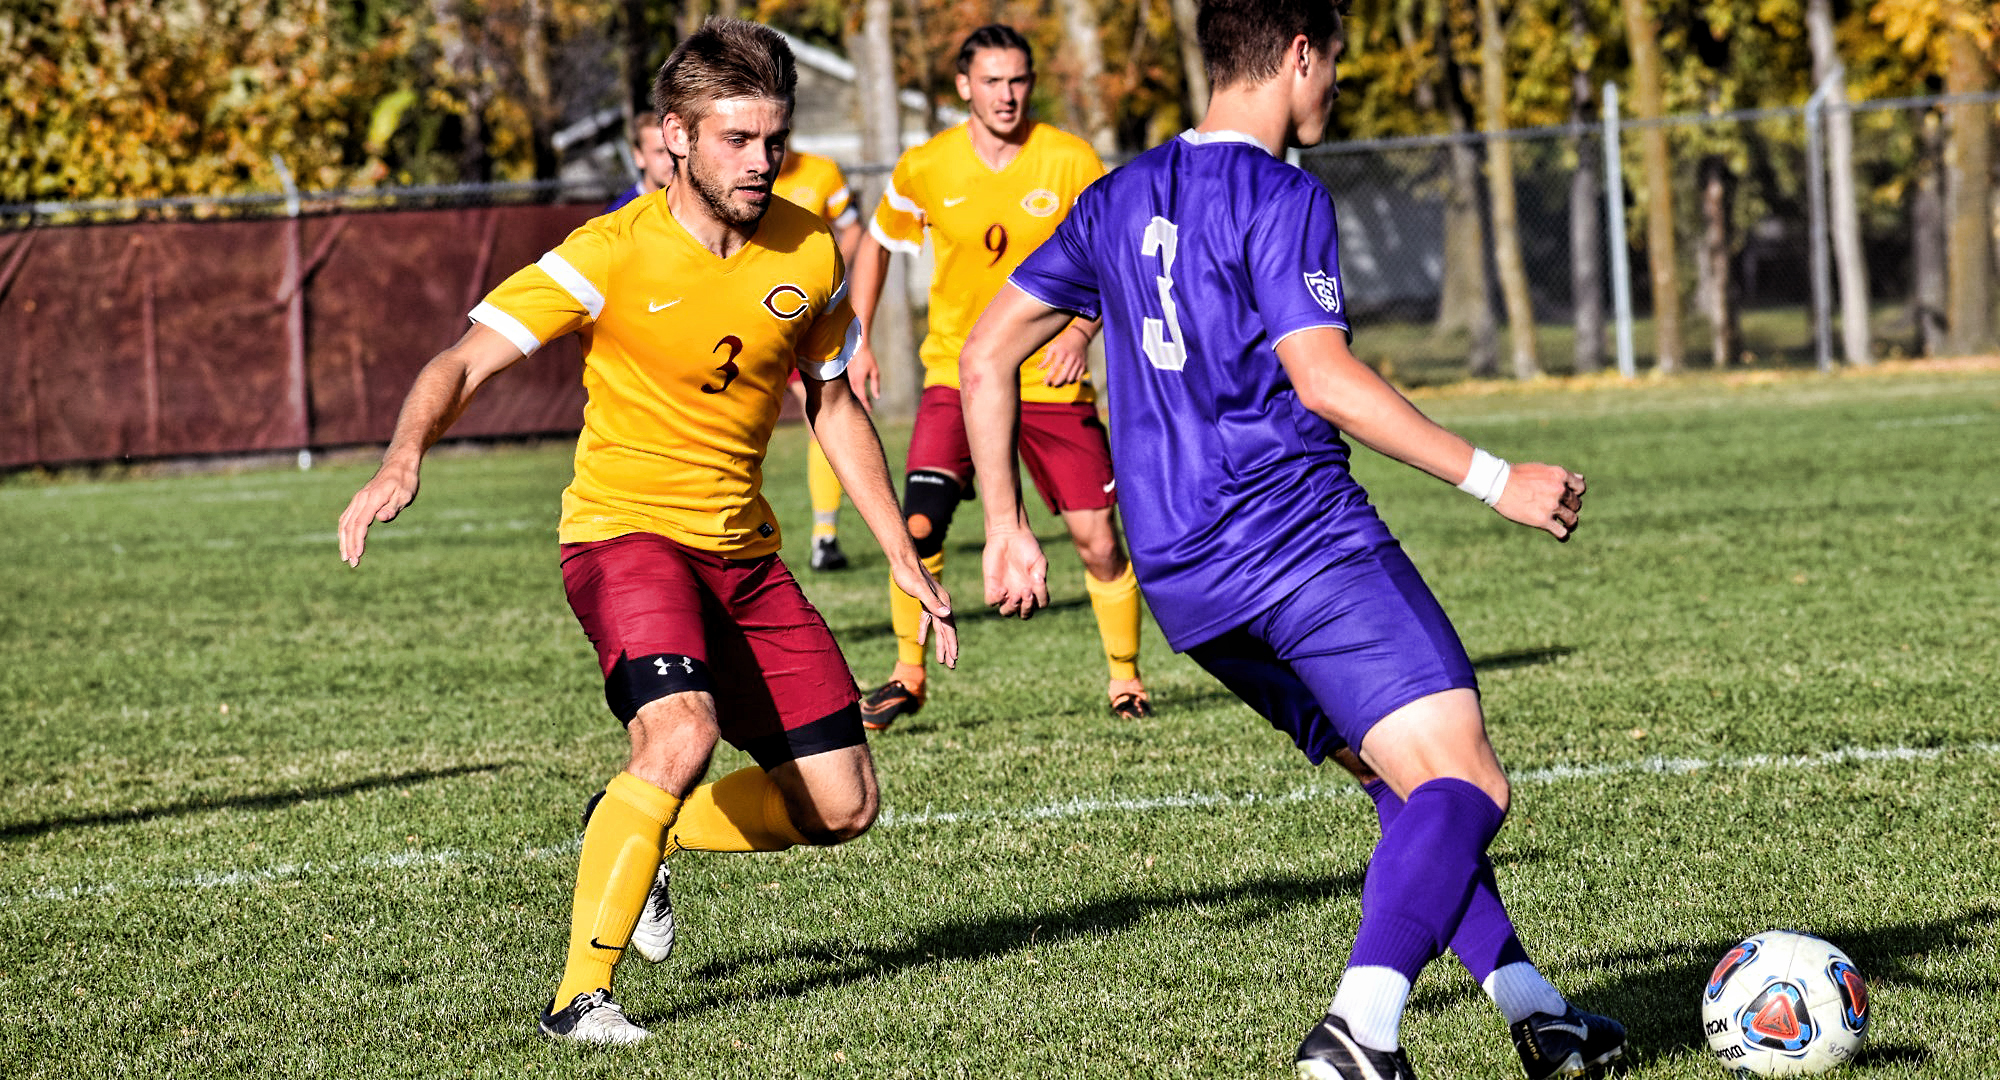 Senior defender Austin Promersberger tracks down a St. Thomas attacker in the Cobbers' game with the #5 Tommies. (Photo courtesy of Maddy Reed)